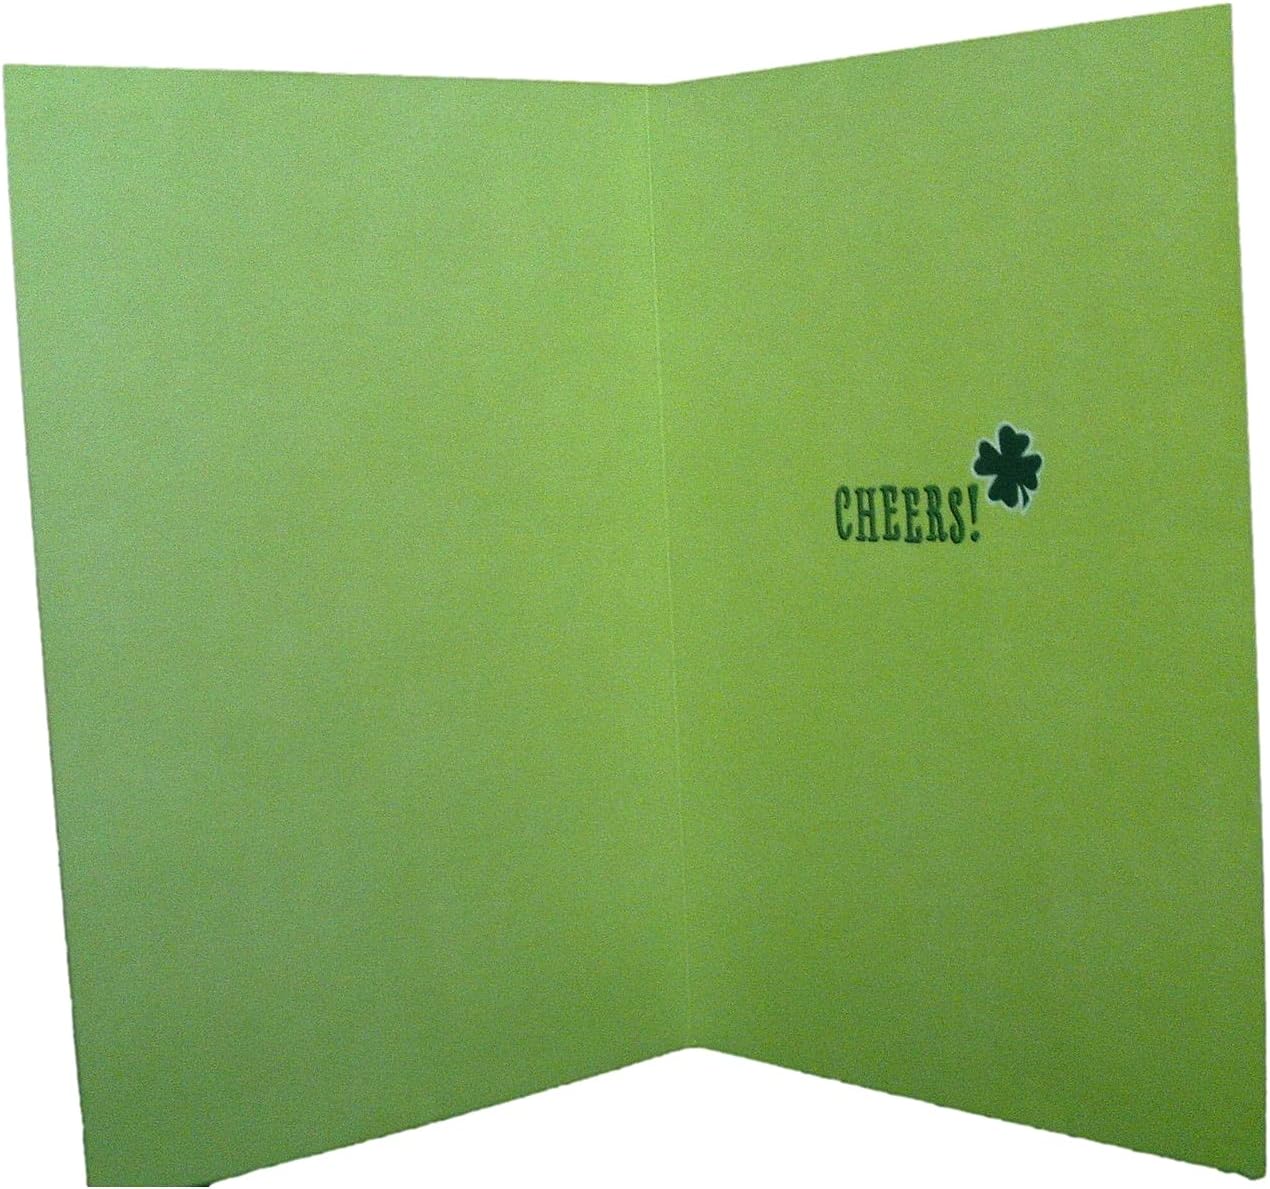 Cheers Happy St. Patrick's Day Card 